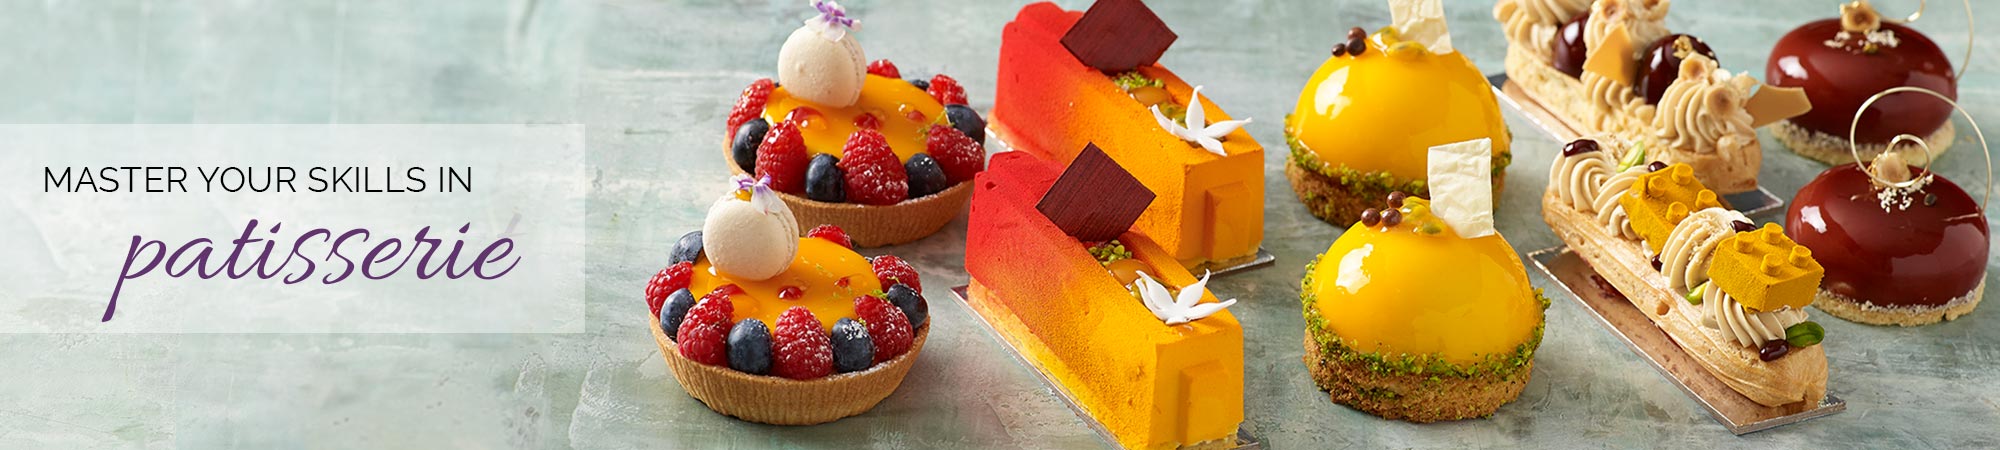 Master your skills in patisserie